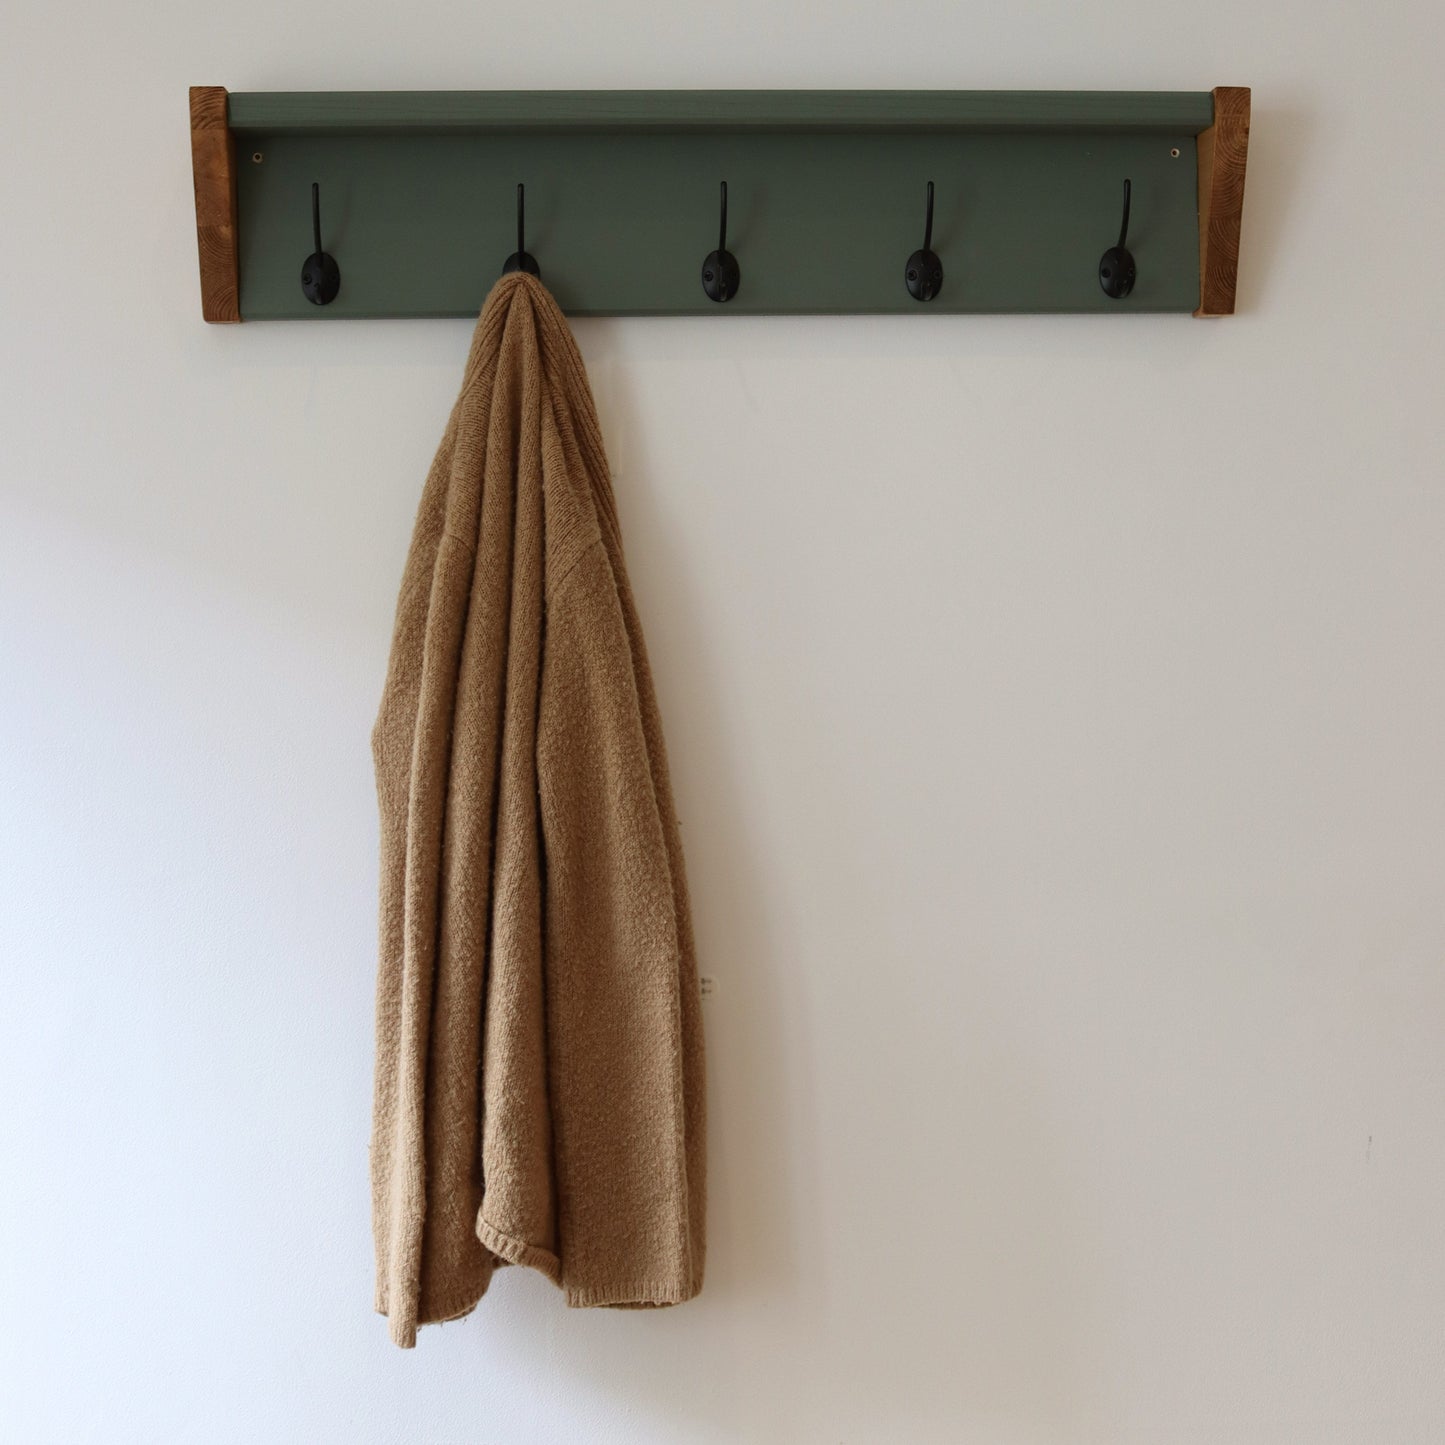 Coat Hook and Shoe Rack Storage Narrow 50 cm by 22 cm by 55 cm